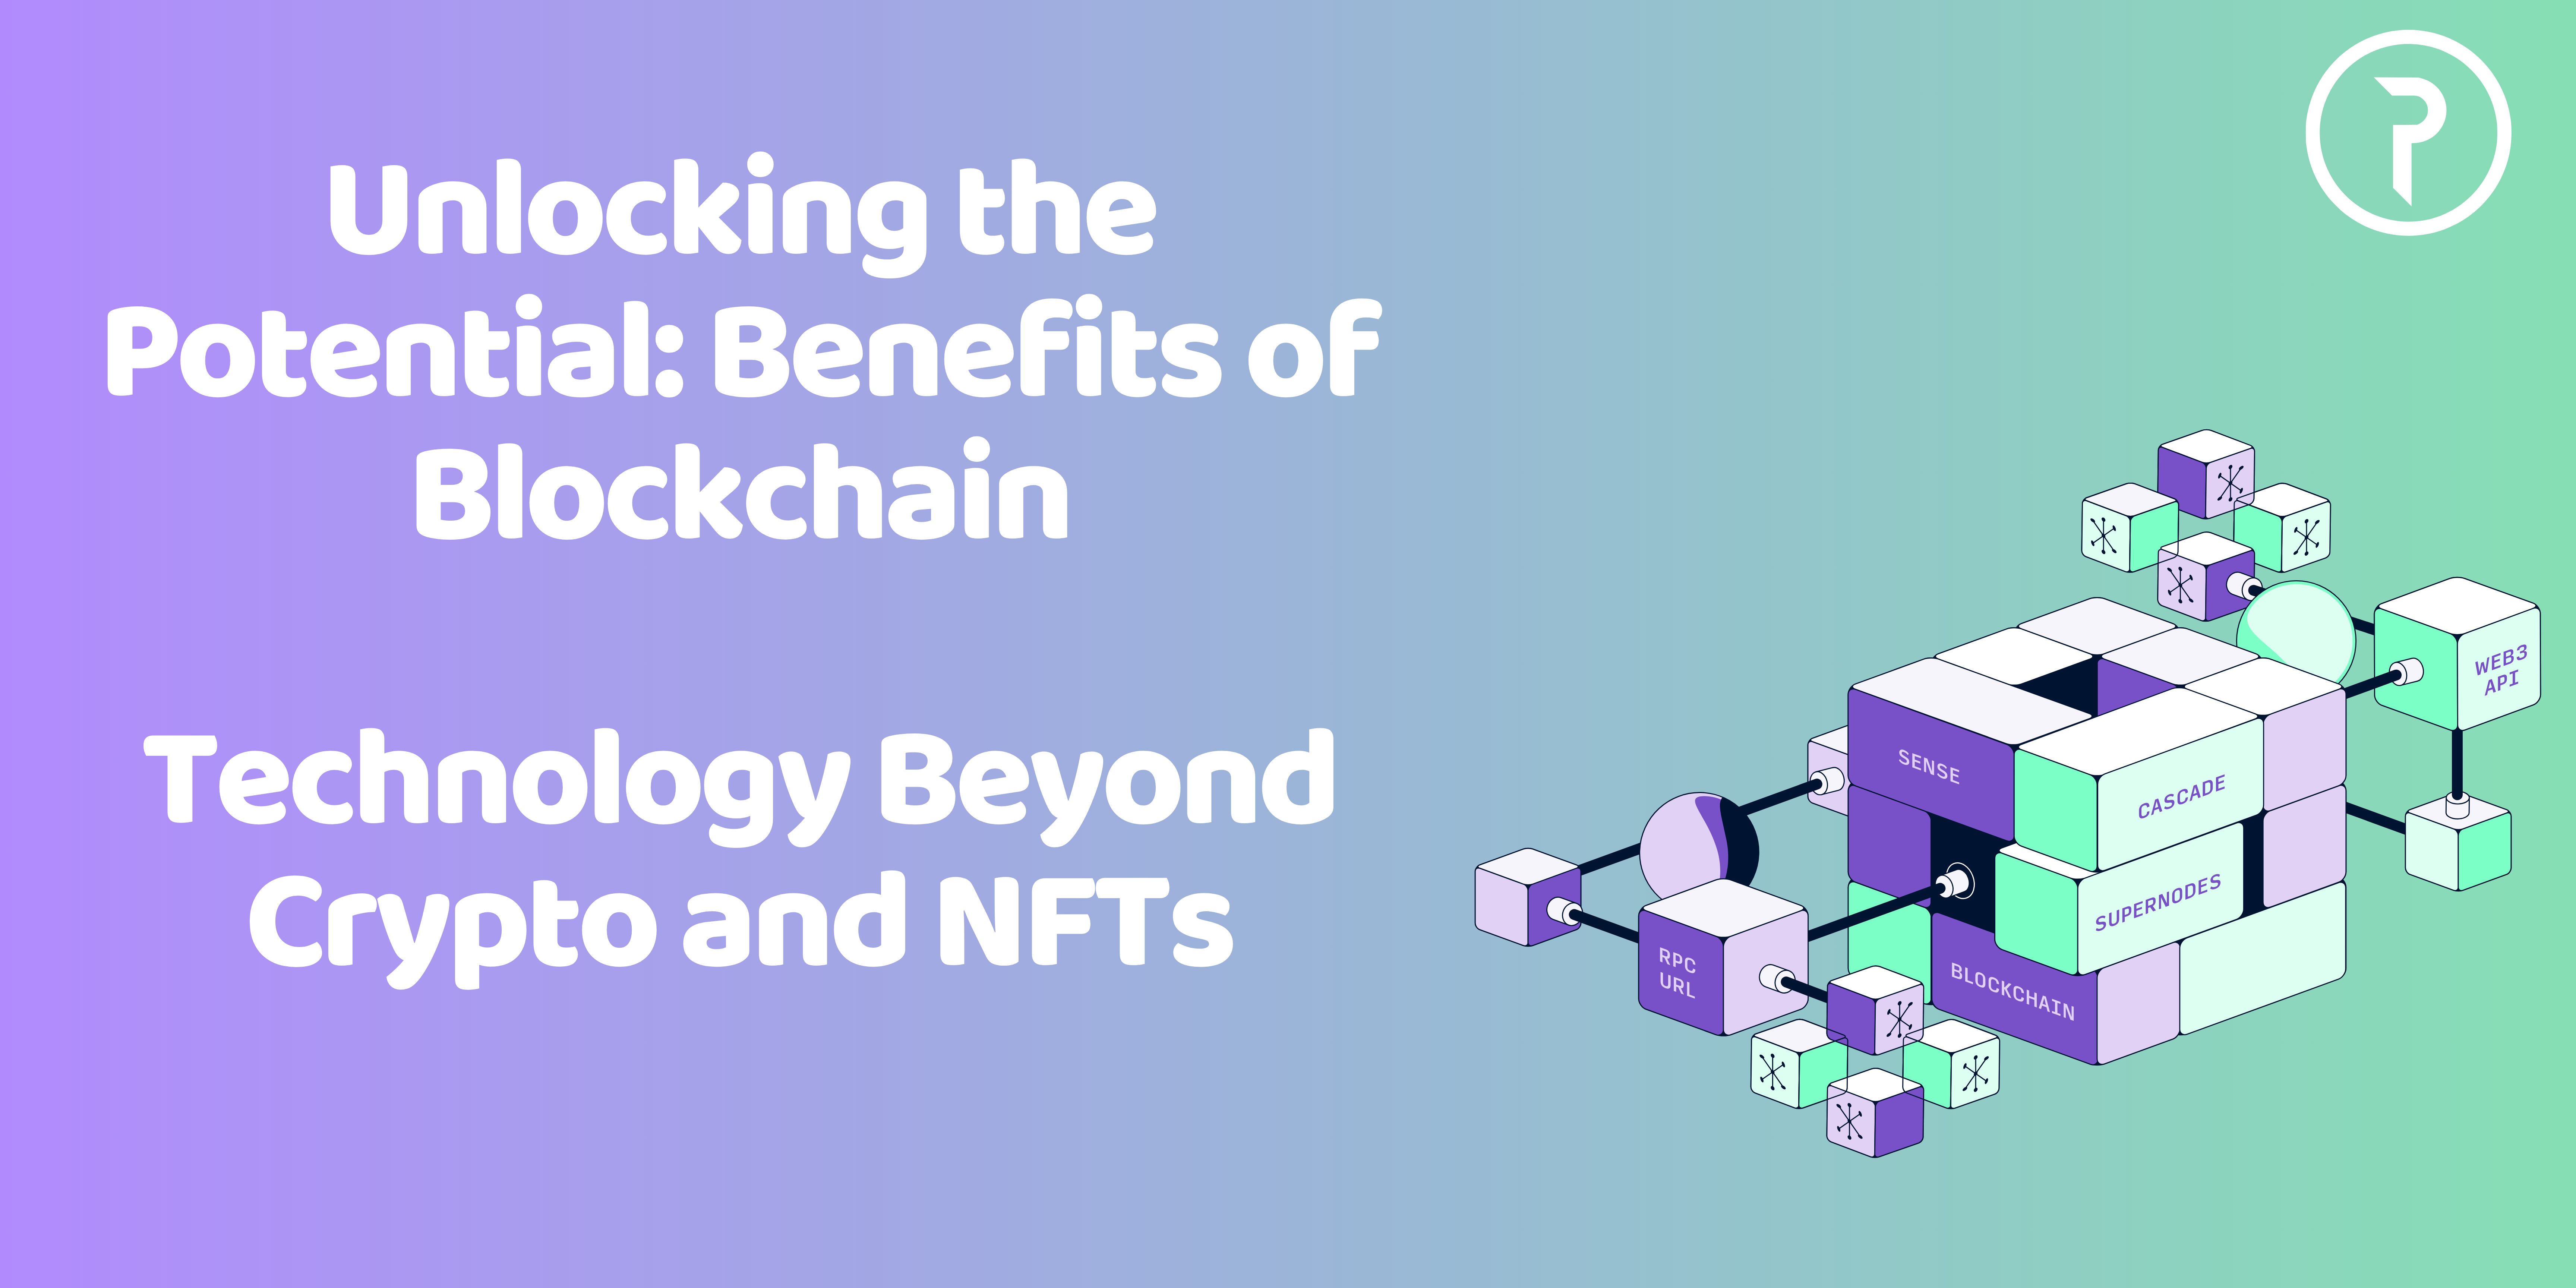 Unlocking the Potential: Benefits of Blockchain Technology Beyond Crypto and NFTs